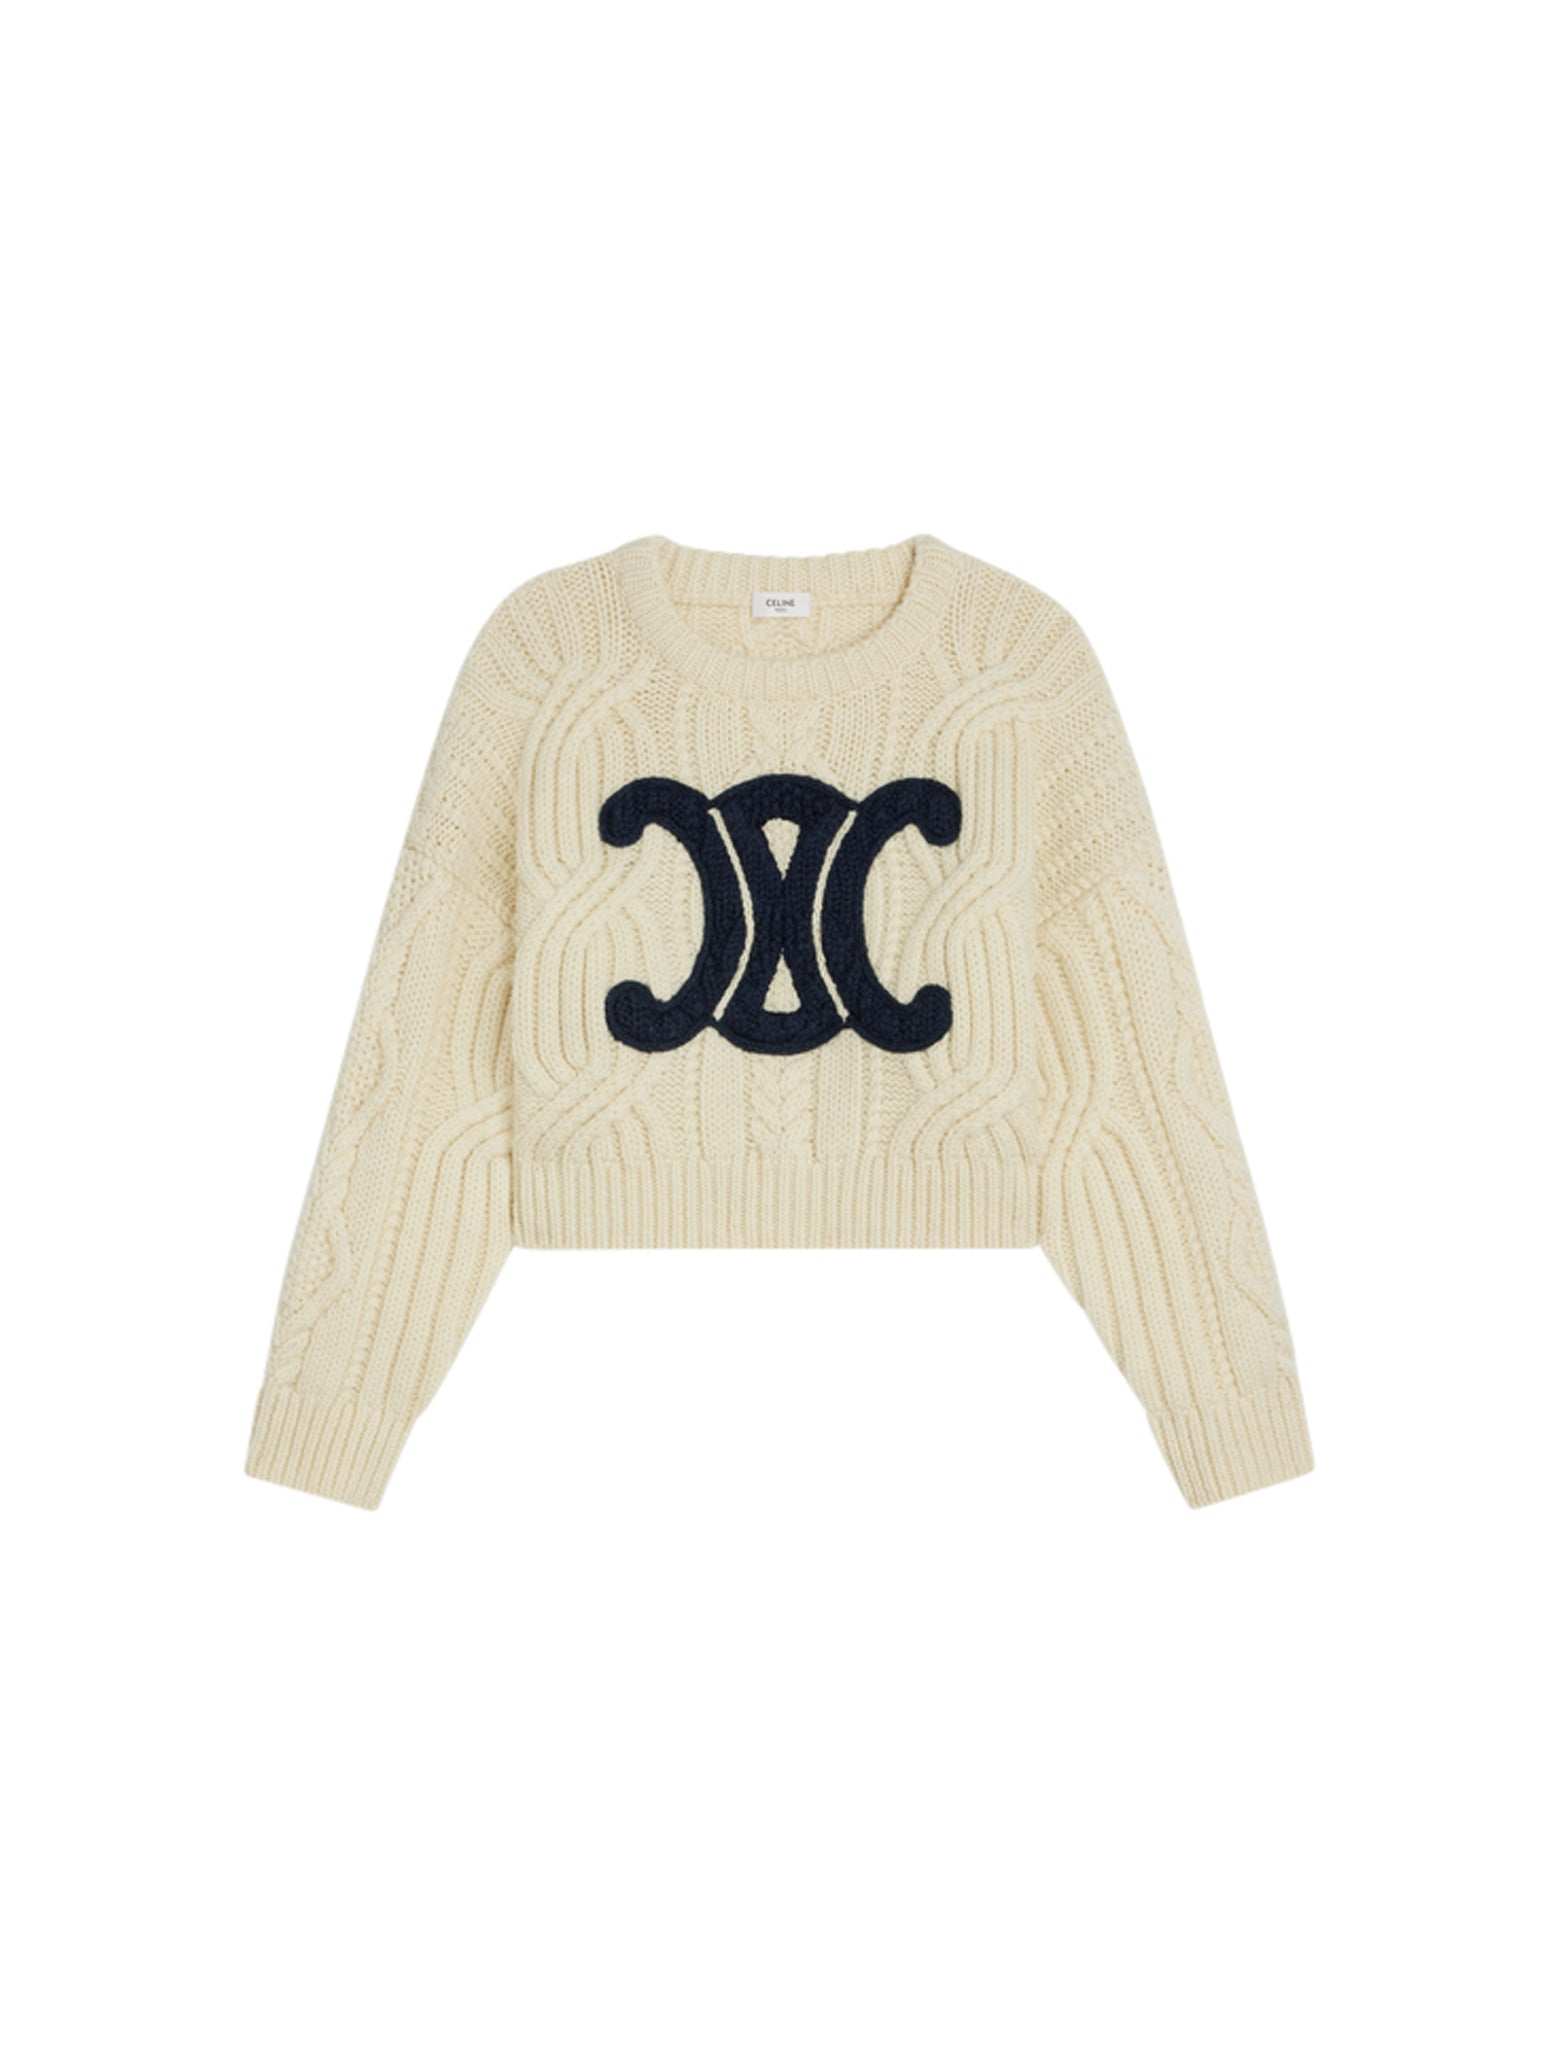 TRIOMPHE CREW NECK SWEATER IN WOOL